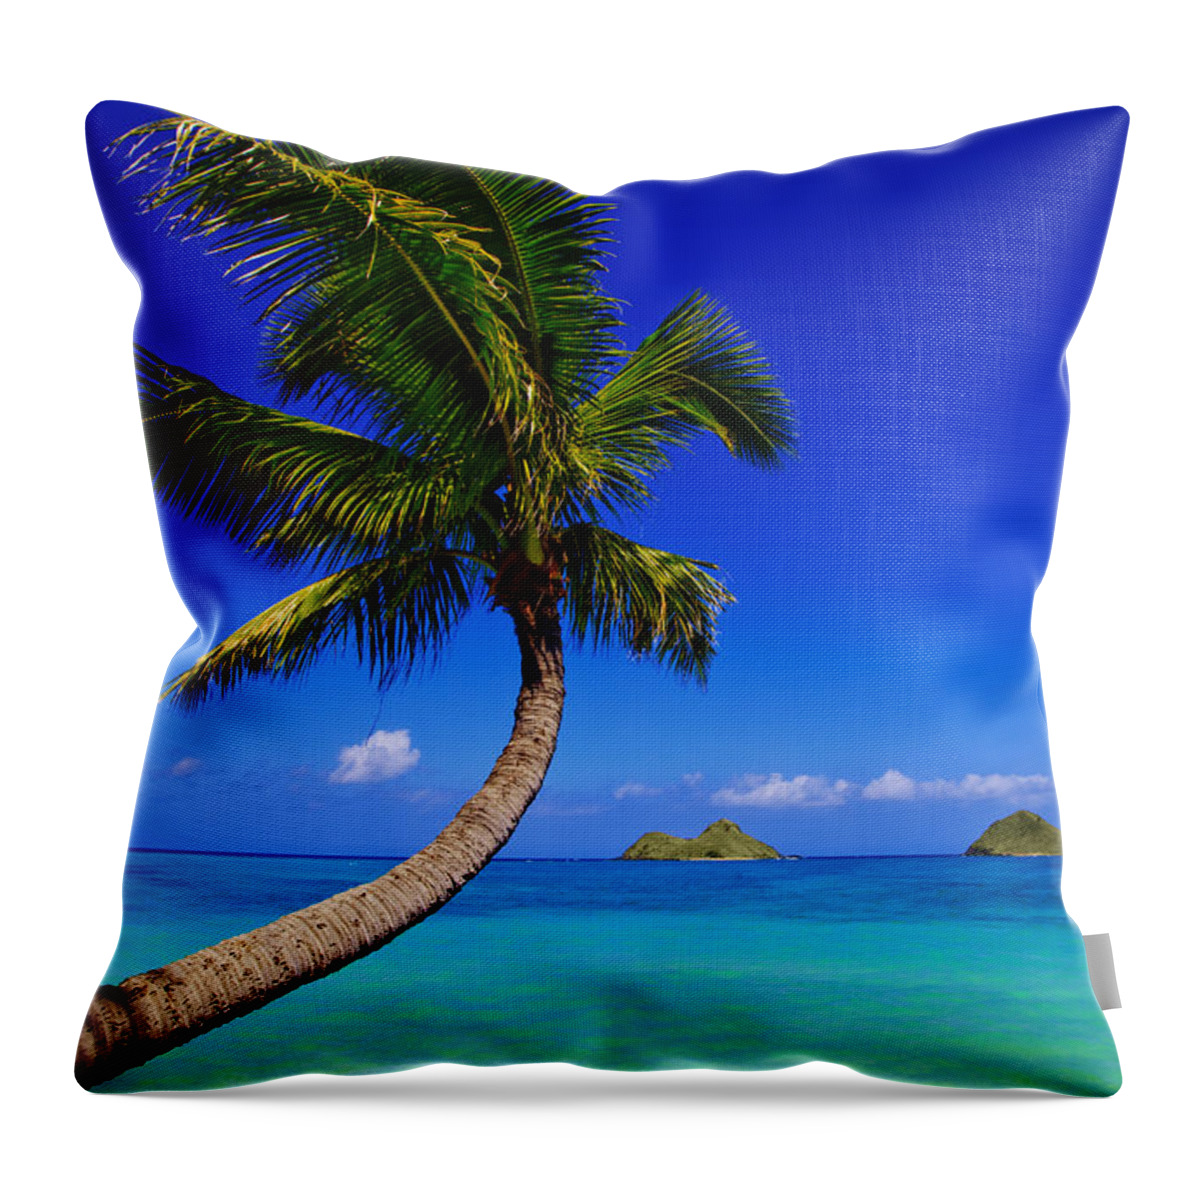 Afternoon Throw Pillow featuring the photograph Paradise Palm over Lanikai by Tomas del Amo - Printscapes